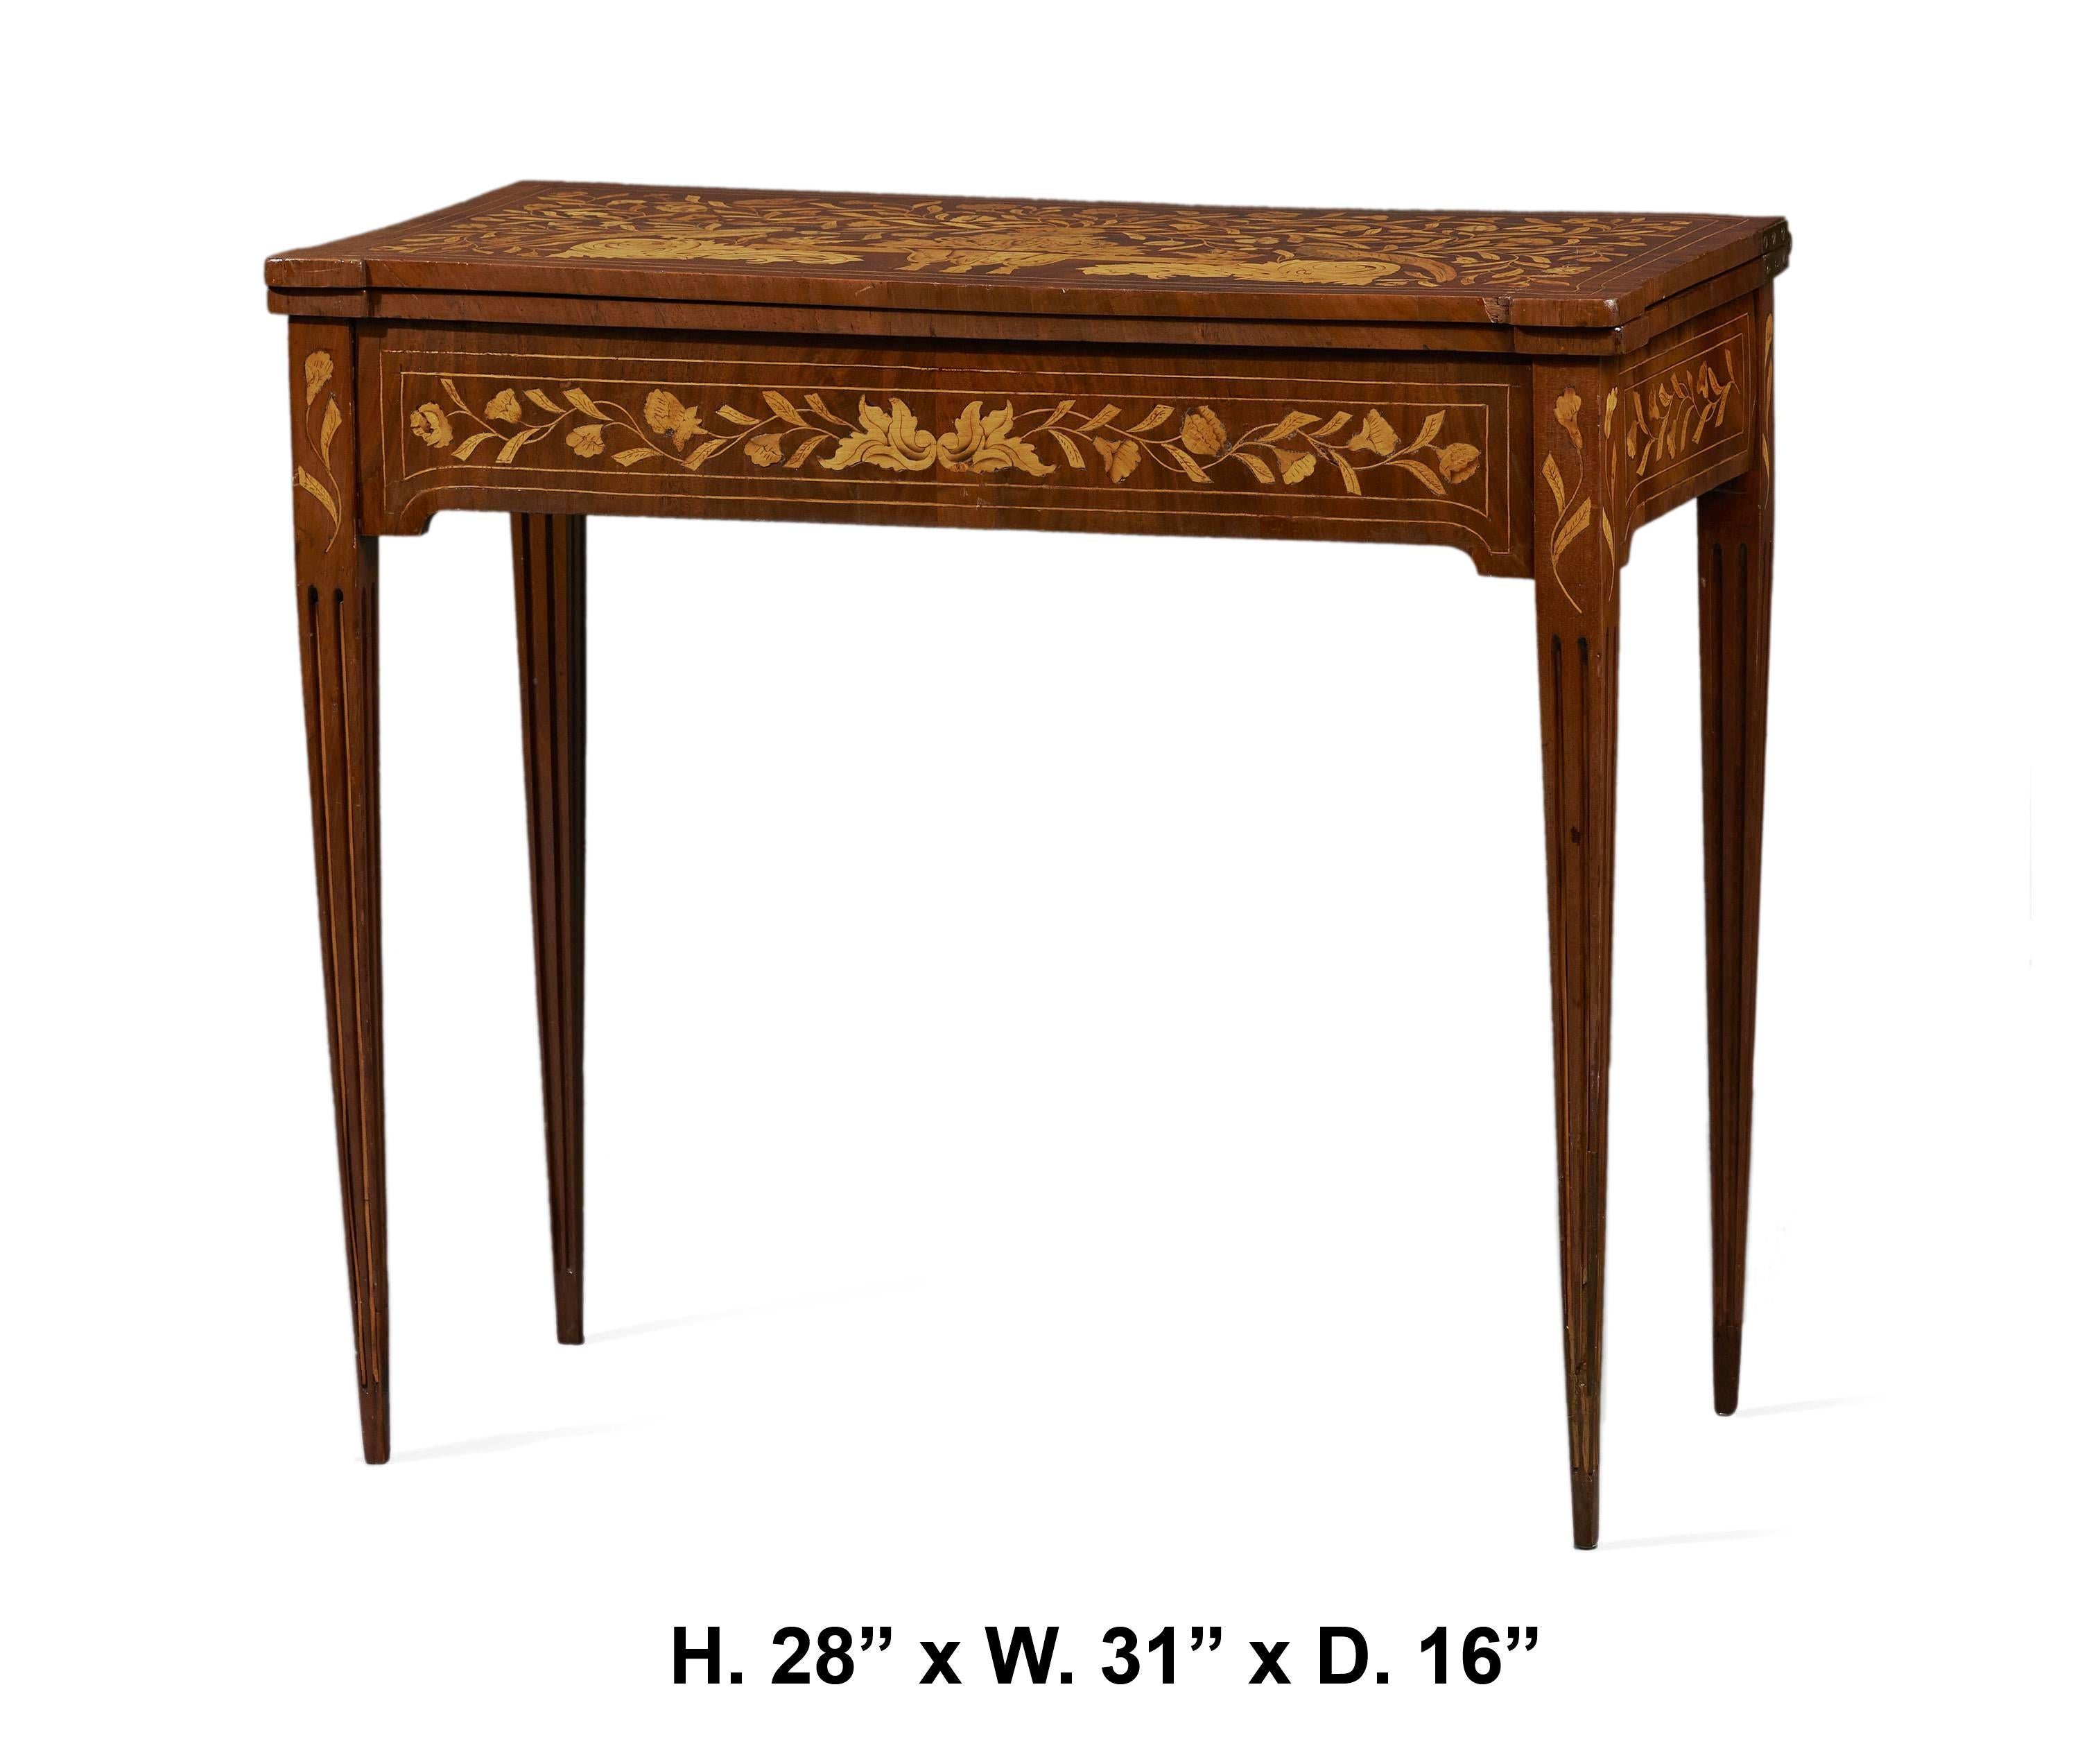 Lovely Dutch marquetry flip-top card table, 19th century.

The flip-top is decorated with intricate marquetry depicting a central floral bouquet flanked by two birds, revealing a green velvet interior, over a conforming banded frieze decorated in